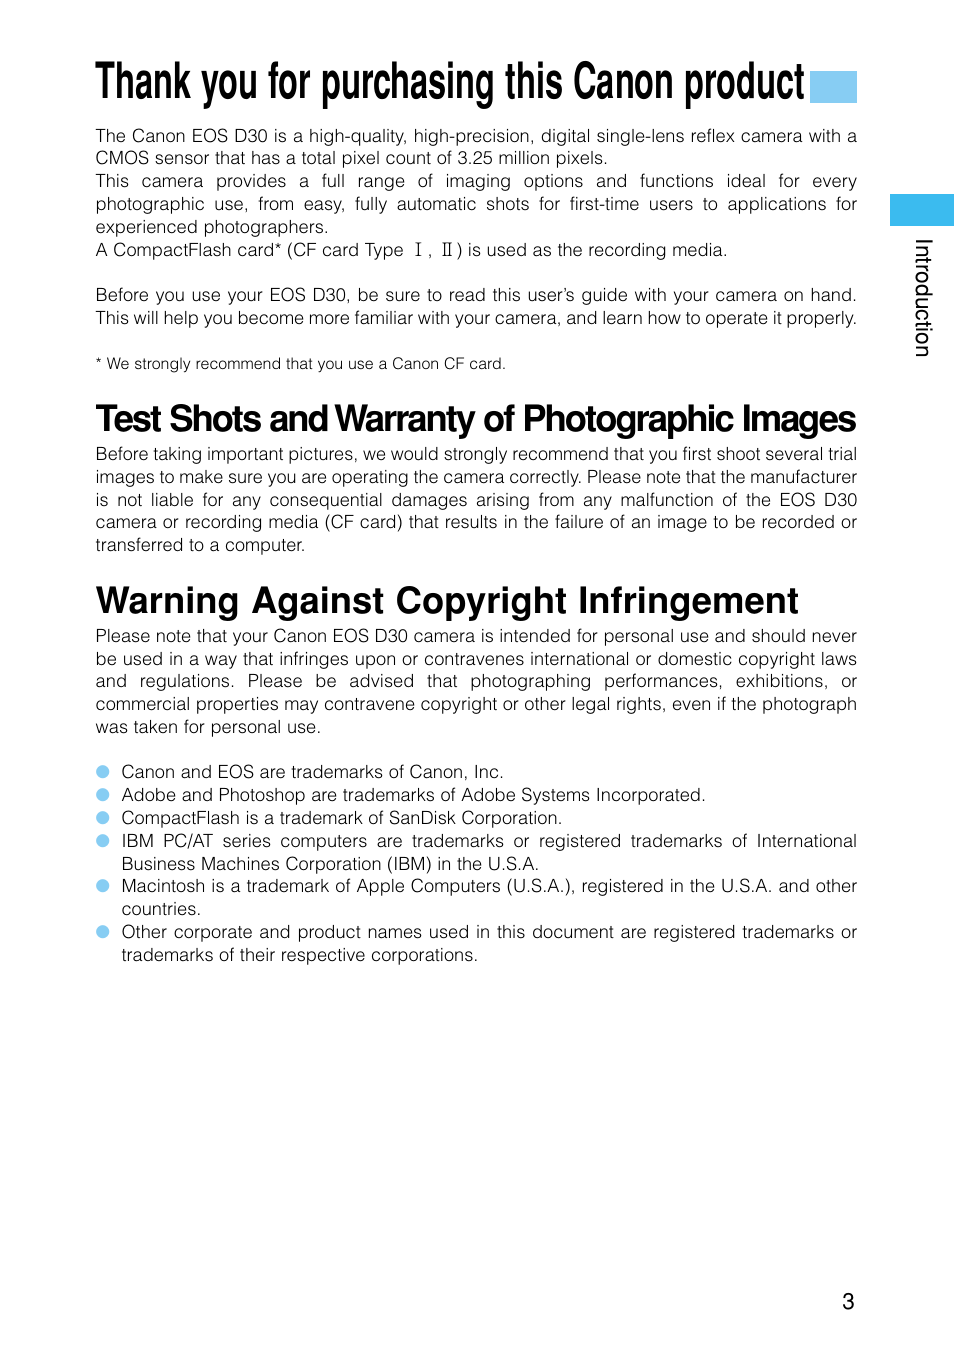 Test shots and warranty of photographic images, Warning against copyright infringement | Canon EOS D30 User Manual | Page 3 / 152